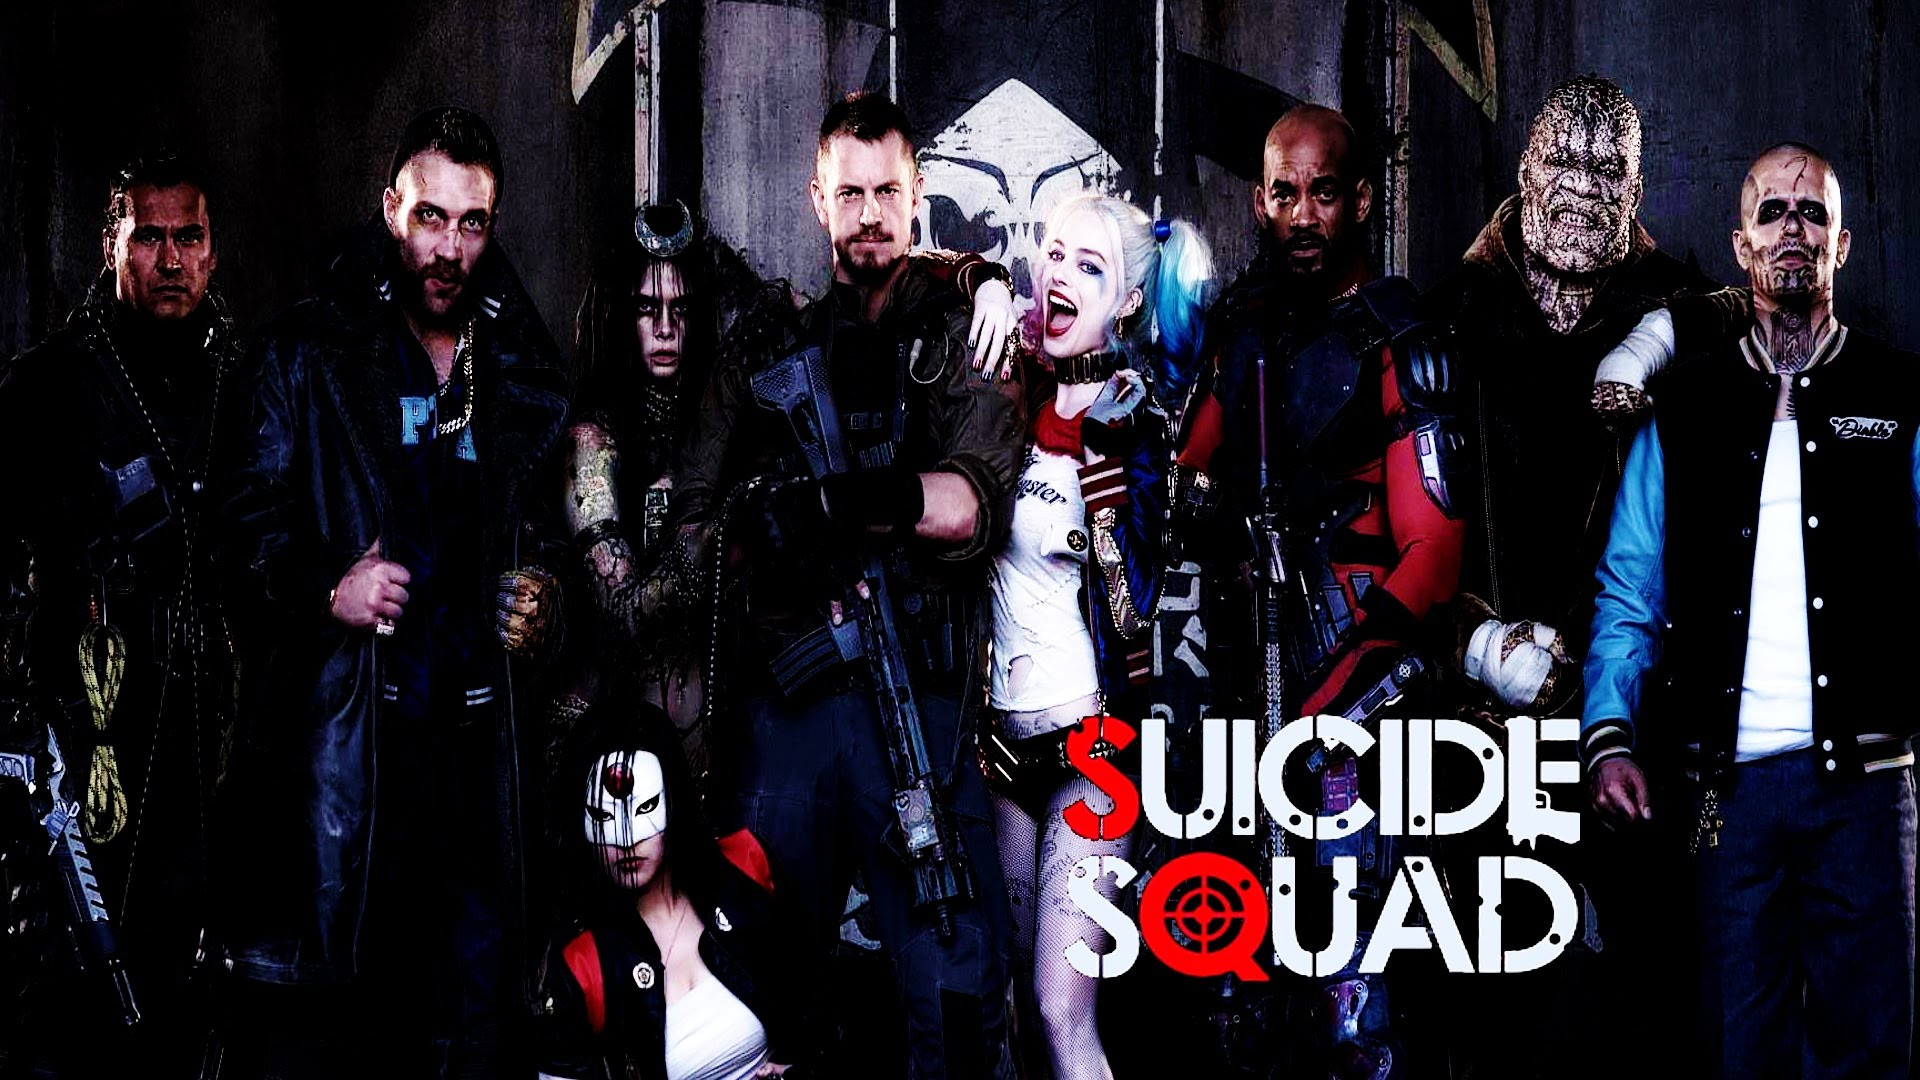 Suicide Squad Full HD Wallpaper and Background ID776924